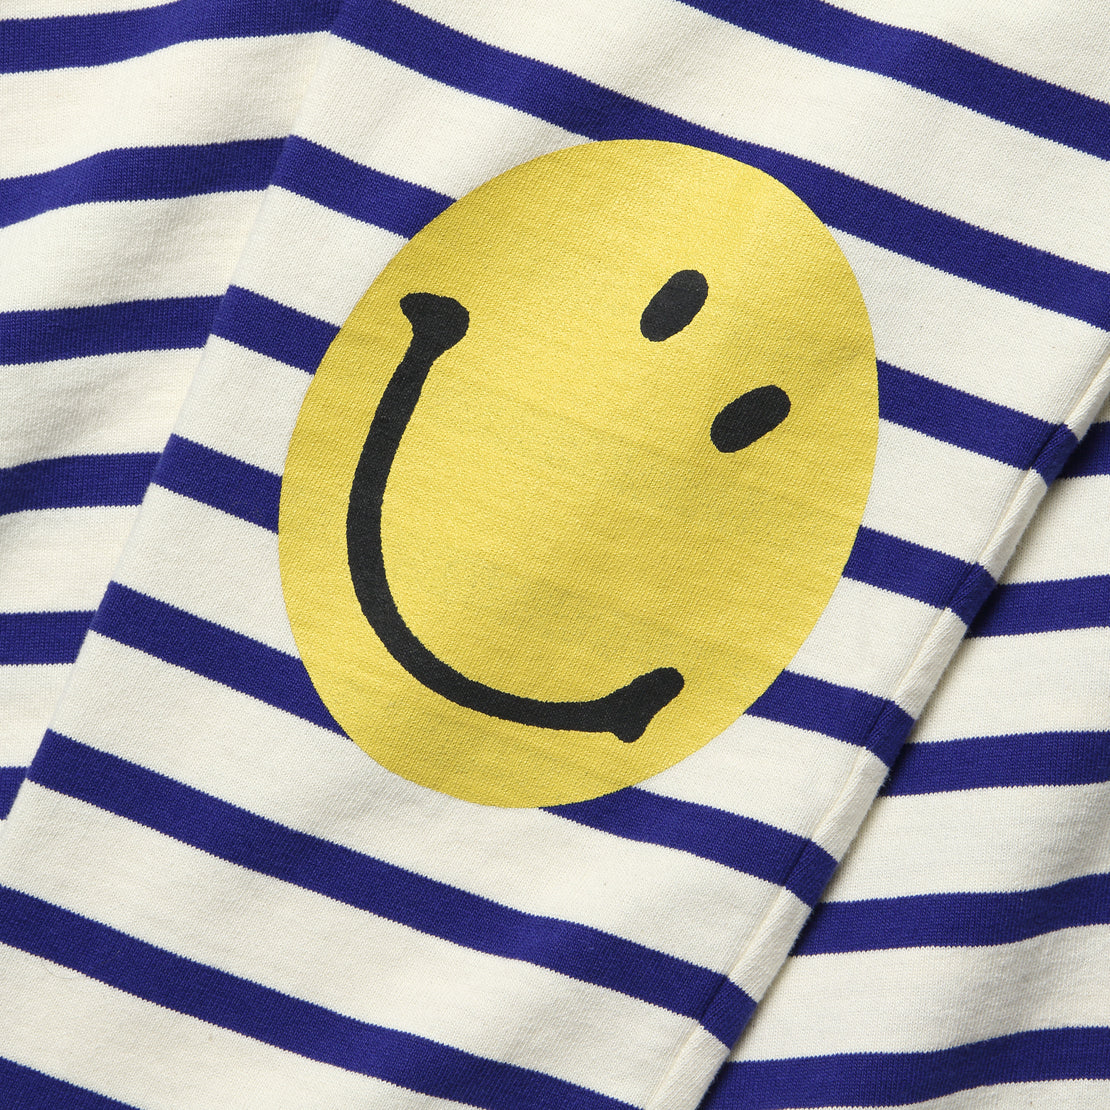 Stripe Jersey Crew Long Sleeve Tee (SMILIE Patch) - Ecru/Blue - Kapital - STAG Provisions - Tops - L/S Tee